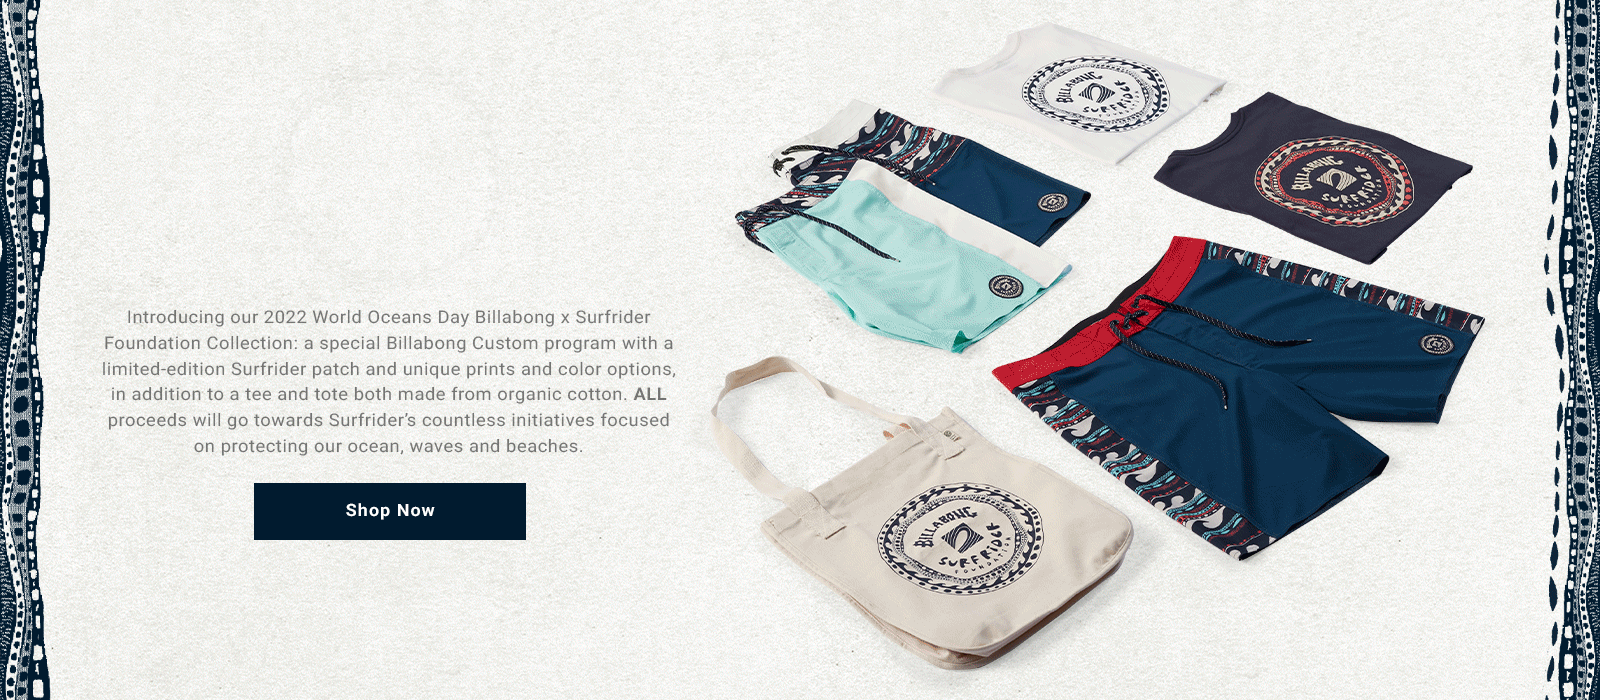 Men's Surfrider Foundation collection of Tees, boardshorts and custom products